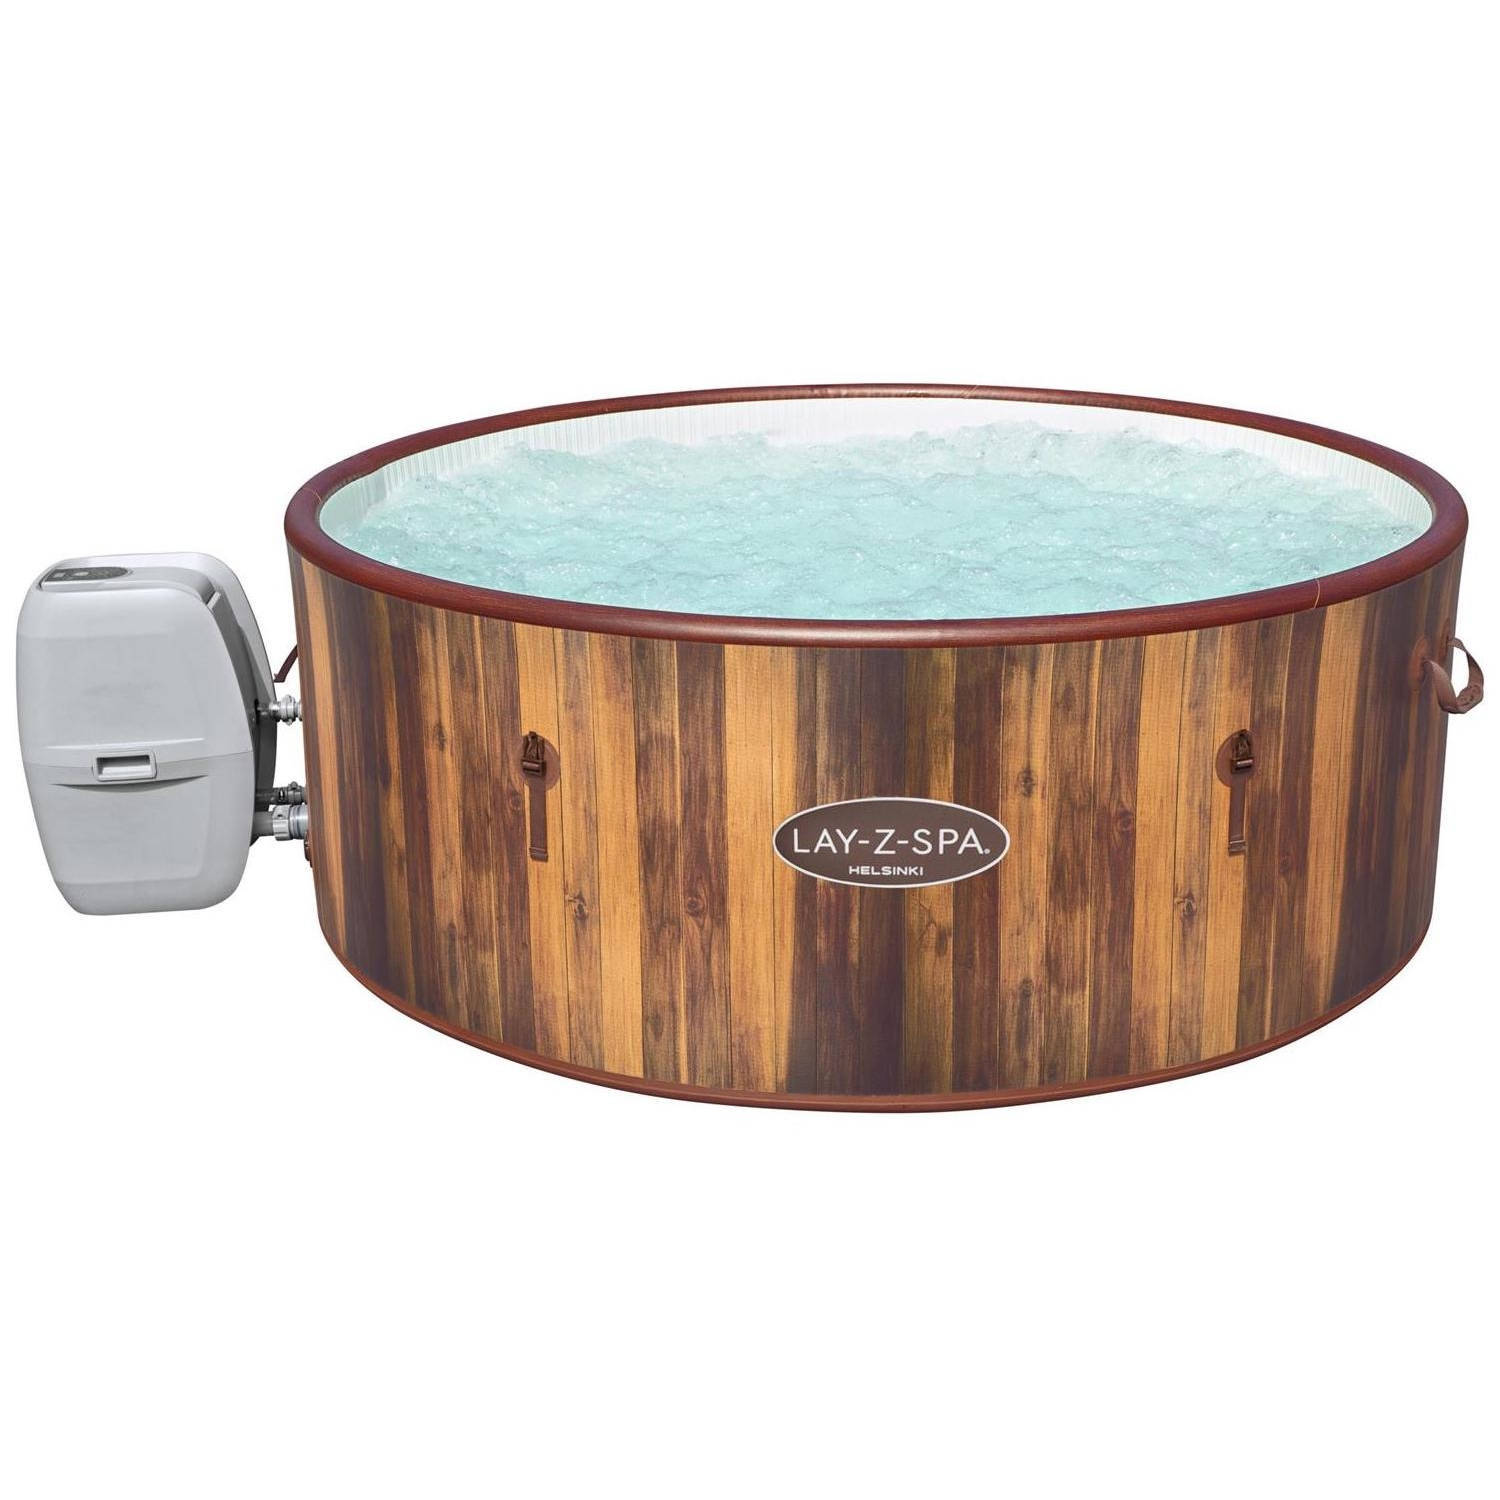 Lay-z-spa Helsinki Max 7 Pers 180 Airjets Jacuzzi Bubbelbad Whirlpool Copy Copy